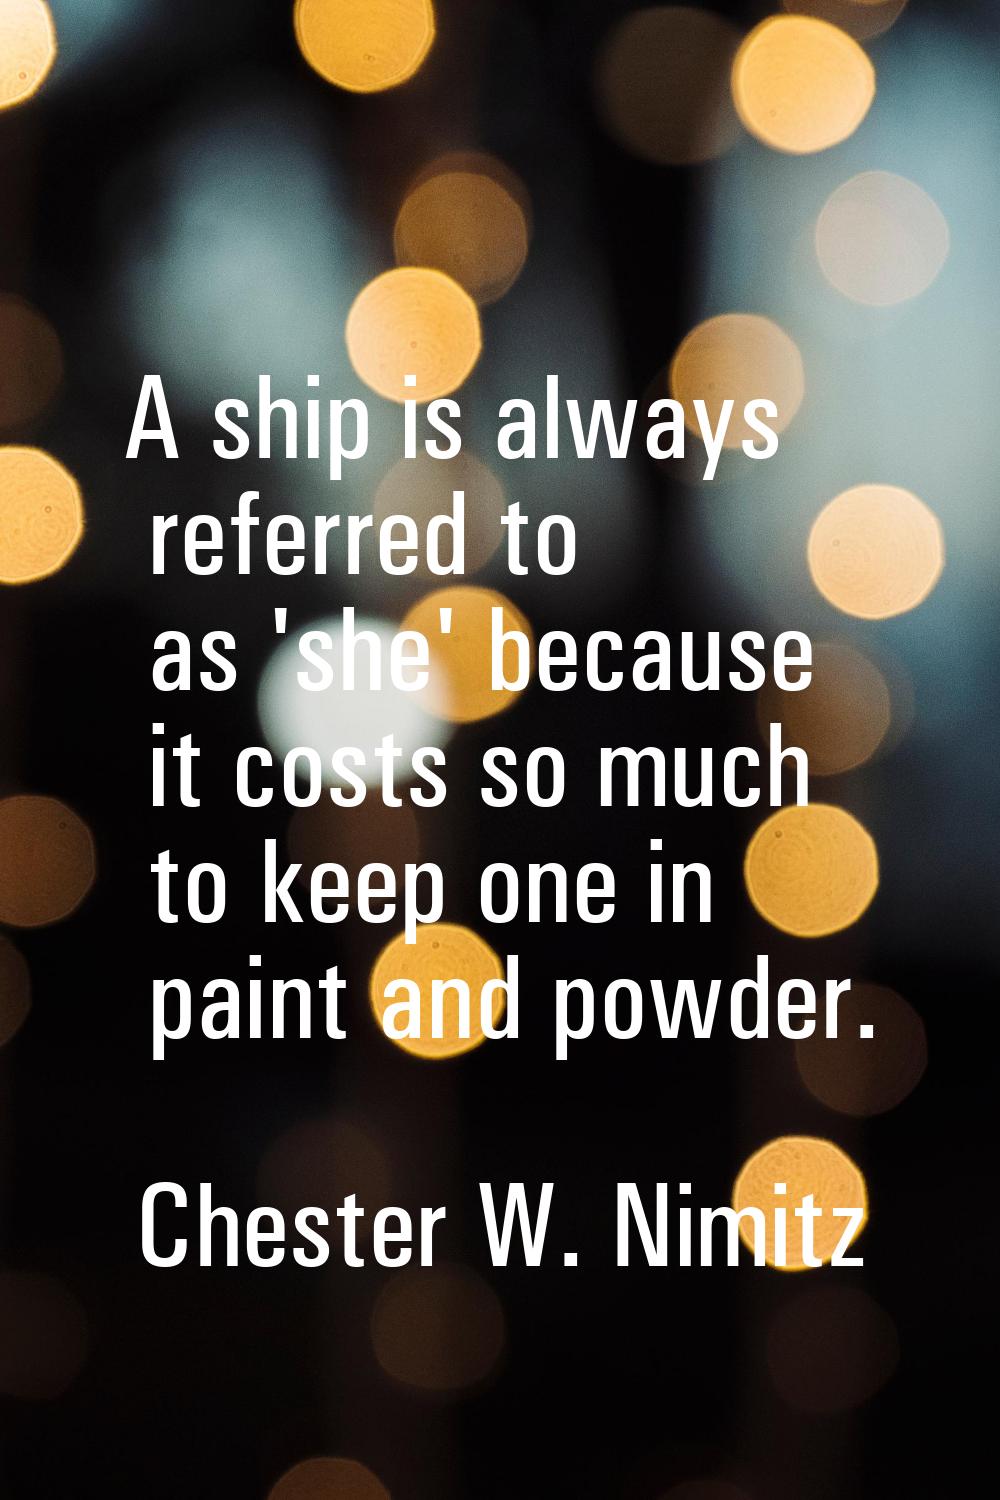 A ship is always referred to as 'she' because it costs so much to keep one in paint and powder.